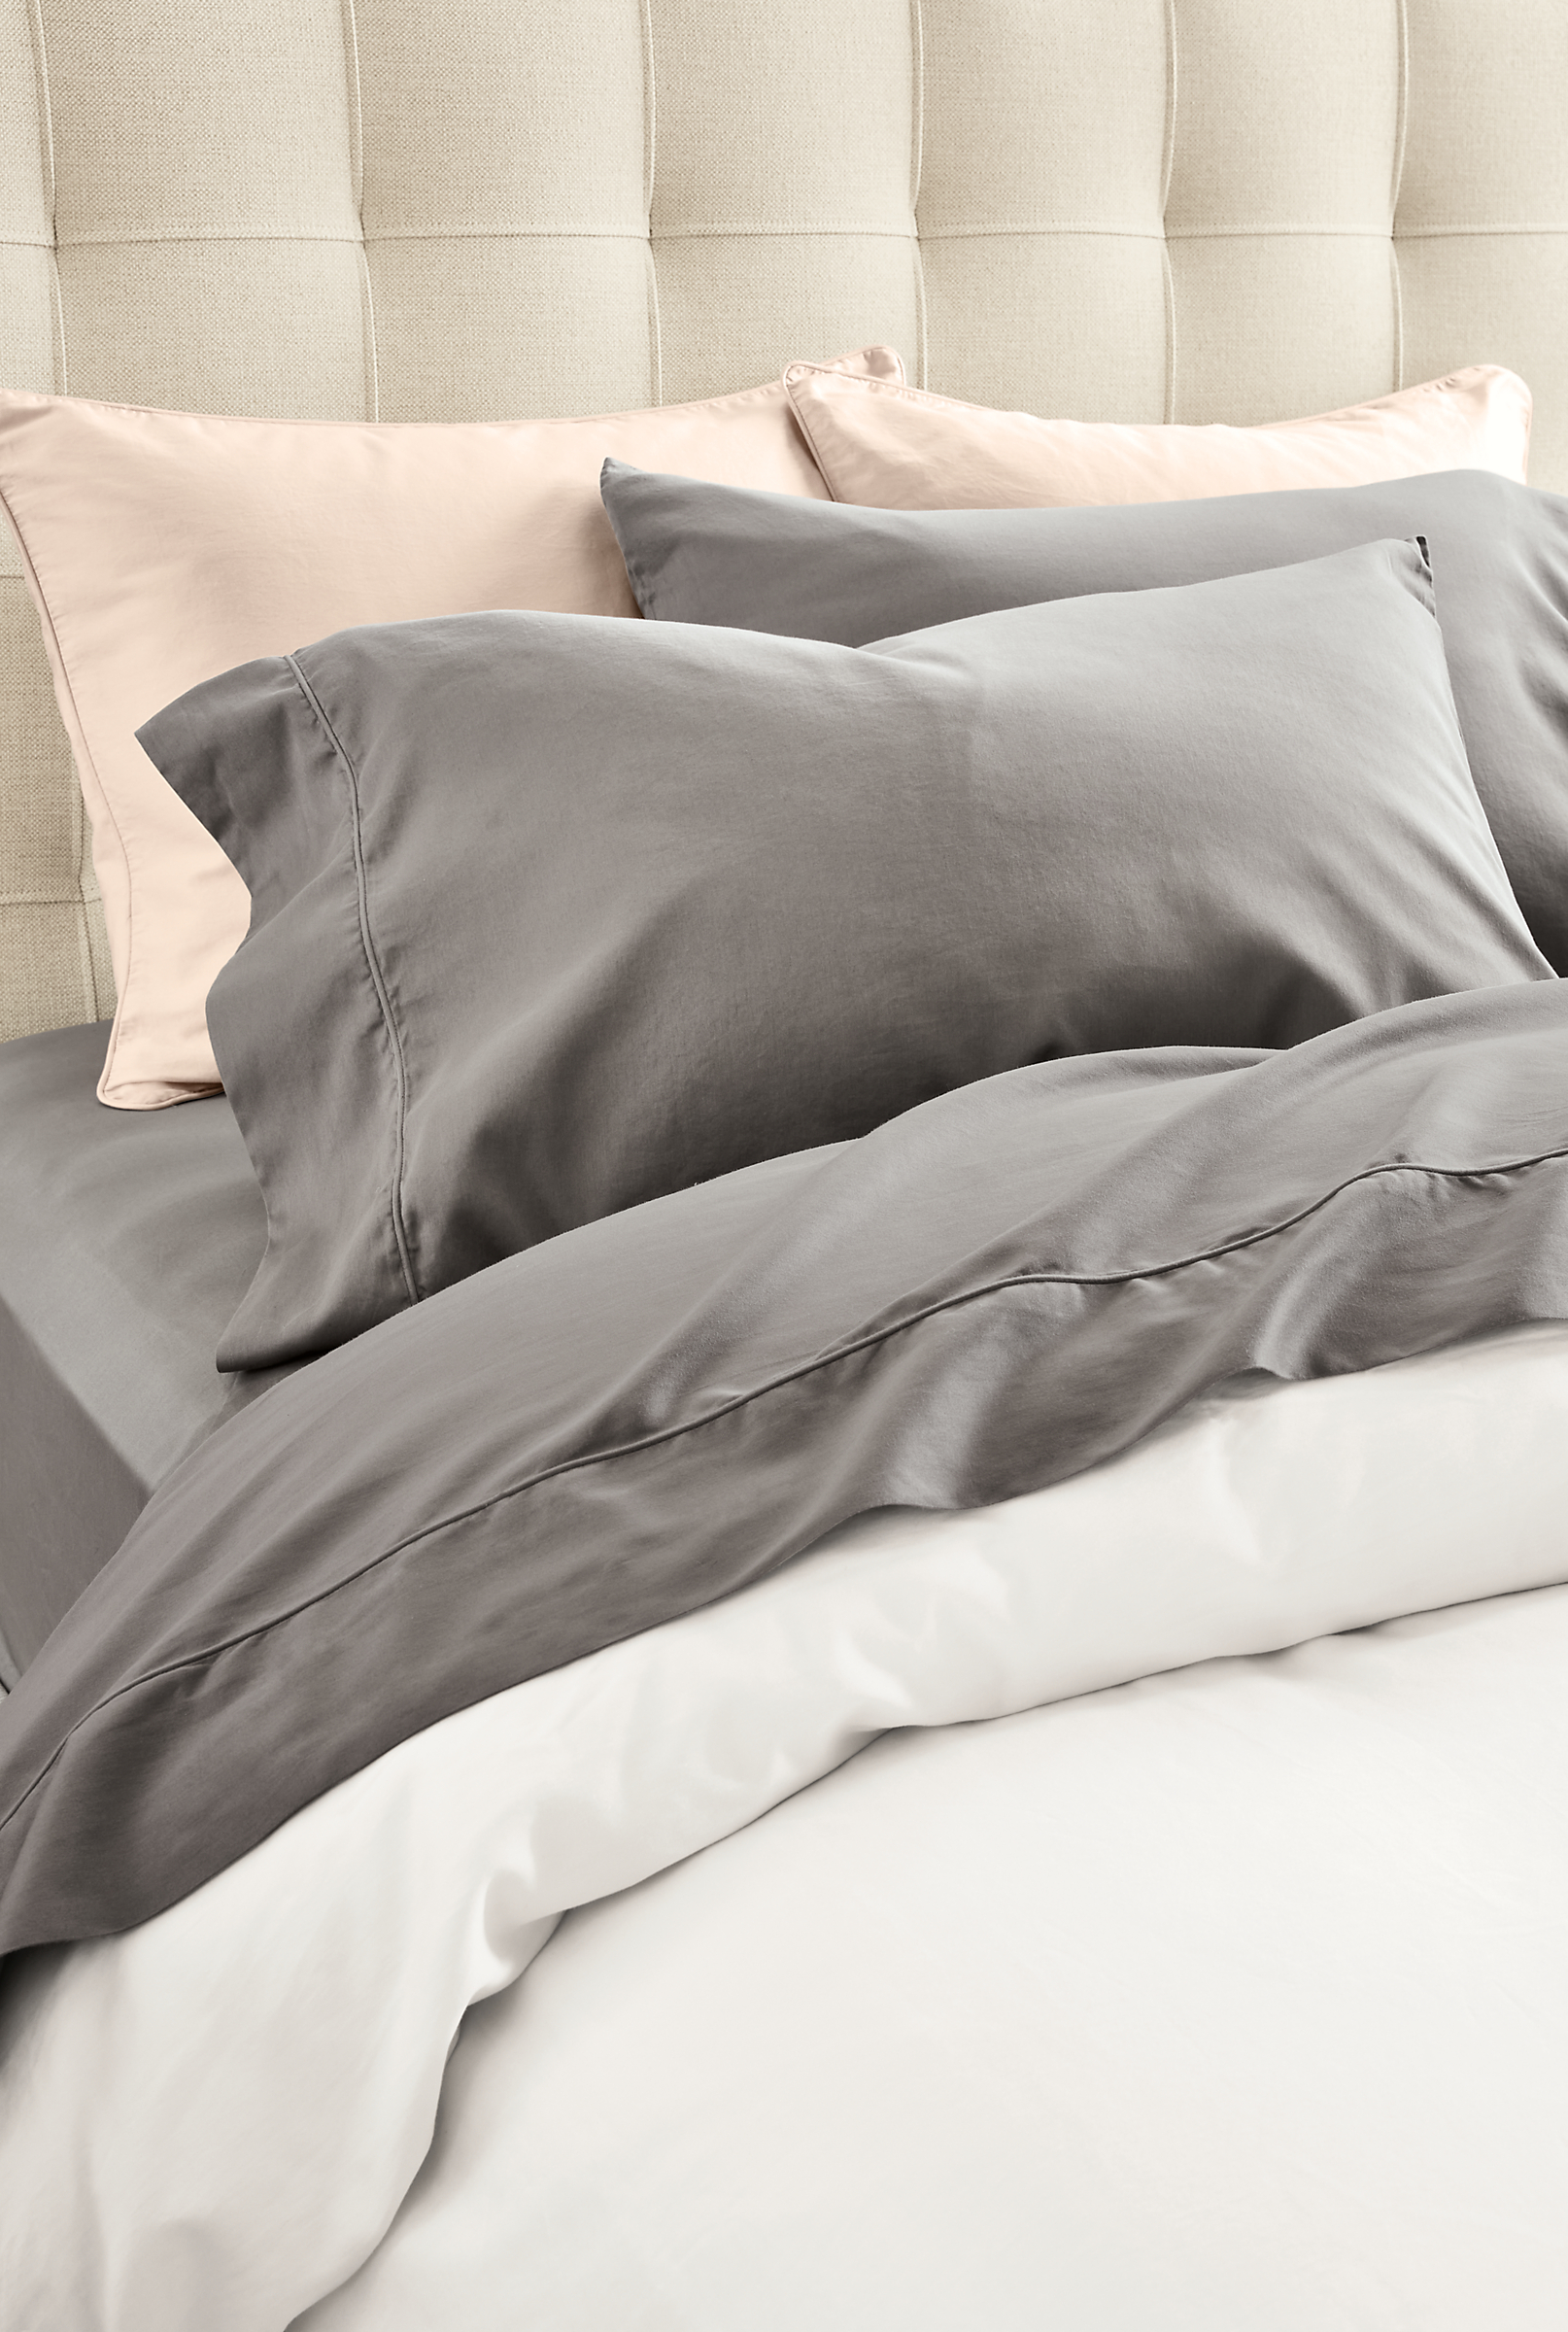 Detailed image of tailored sateen sheets in charcoal and  pillowcases in charcoal and blush.